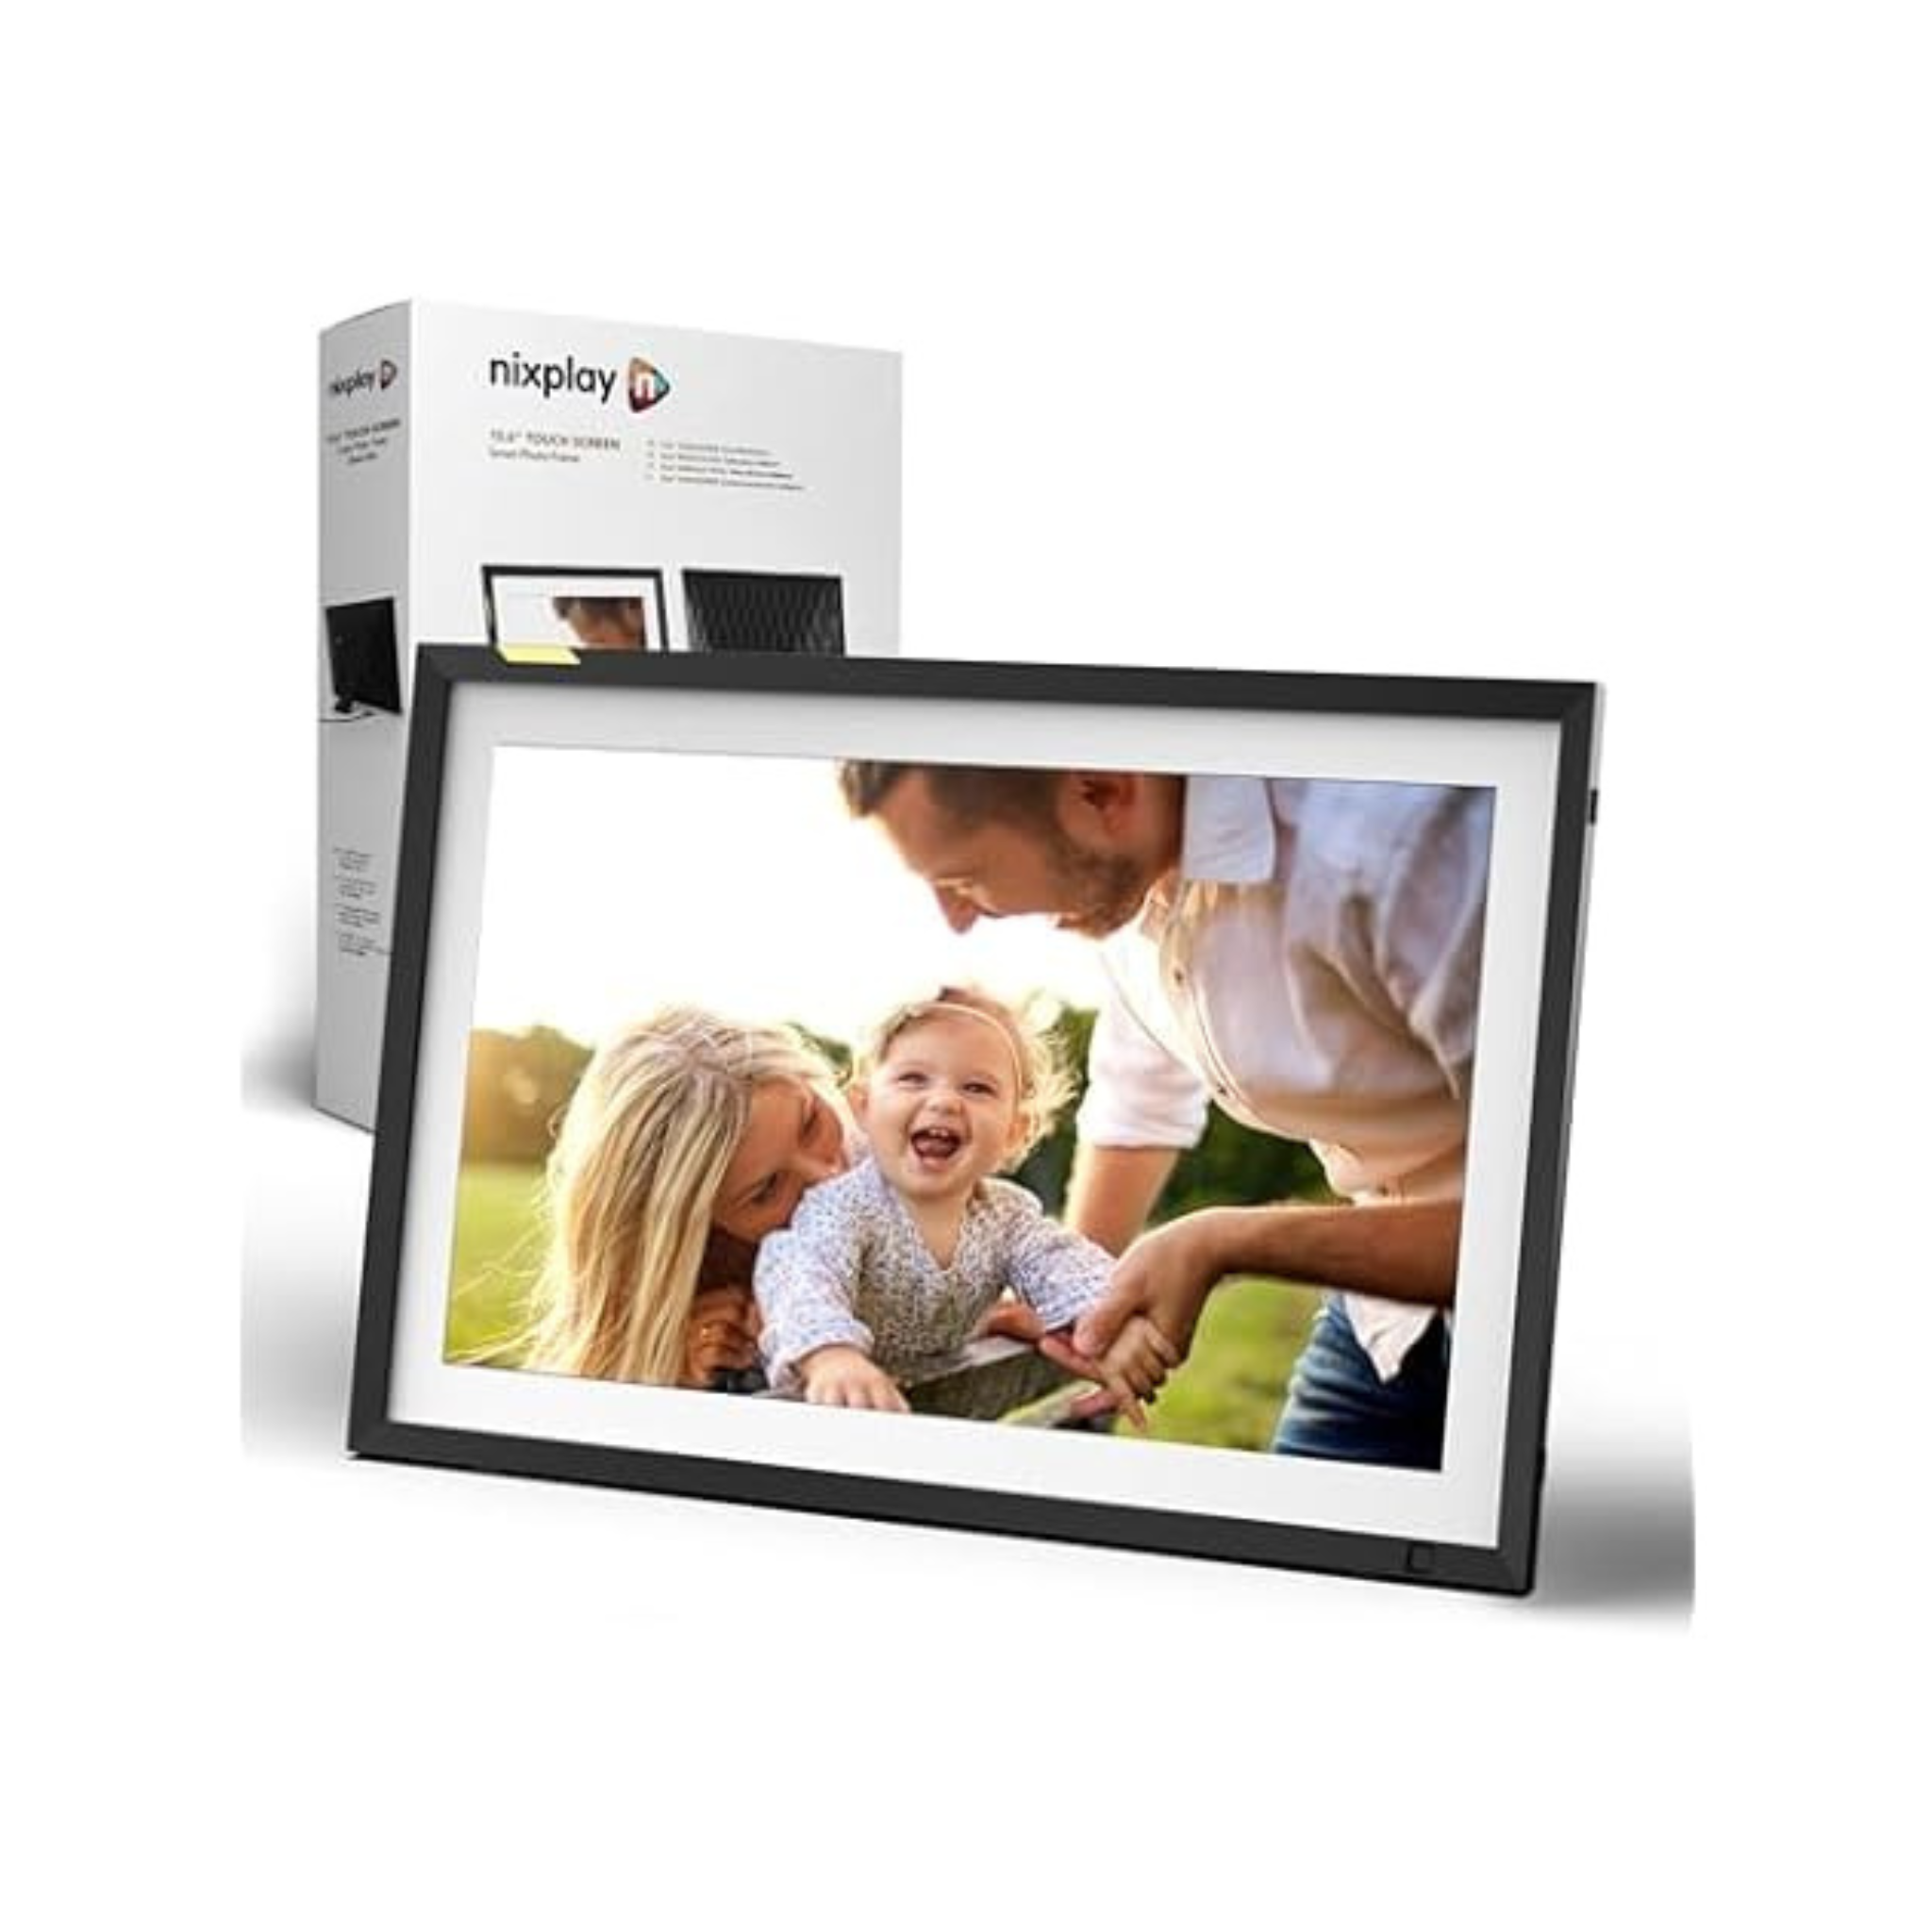 Nixplay Digital 15.6" Touch Screen Photo Frame with WiFi